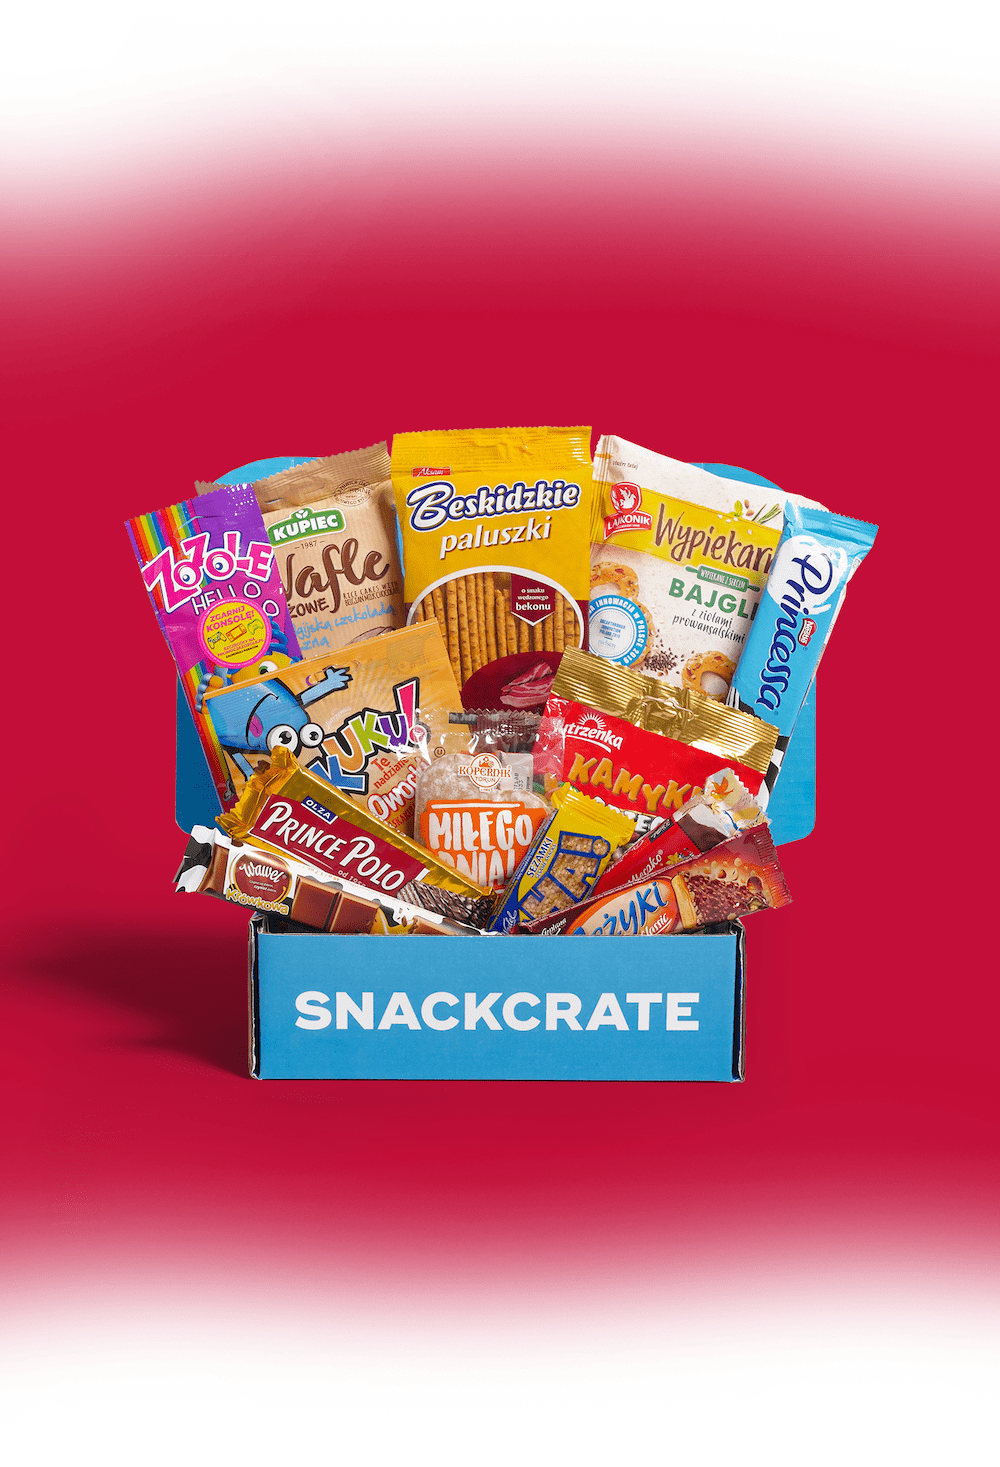 Poland snackcrate full of foreign snacks